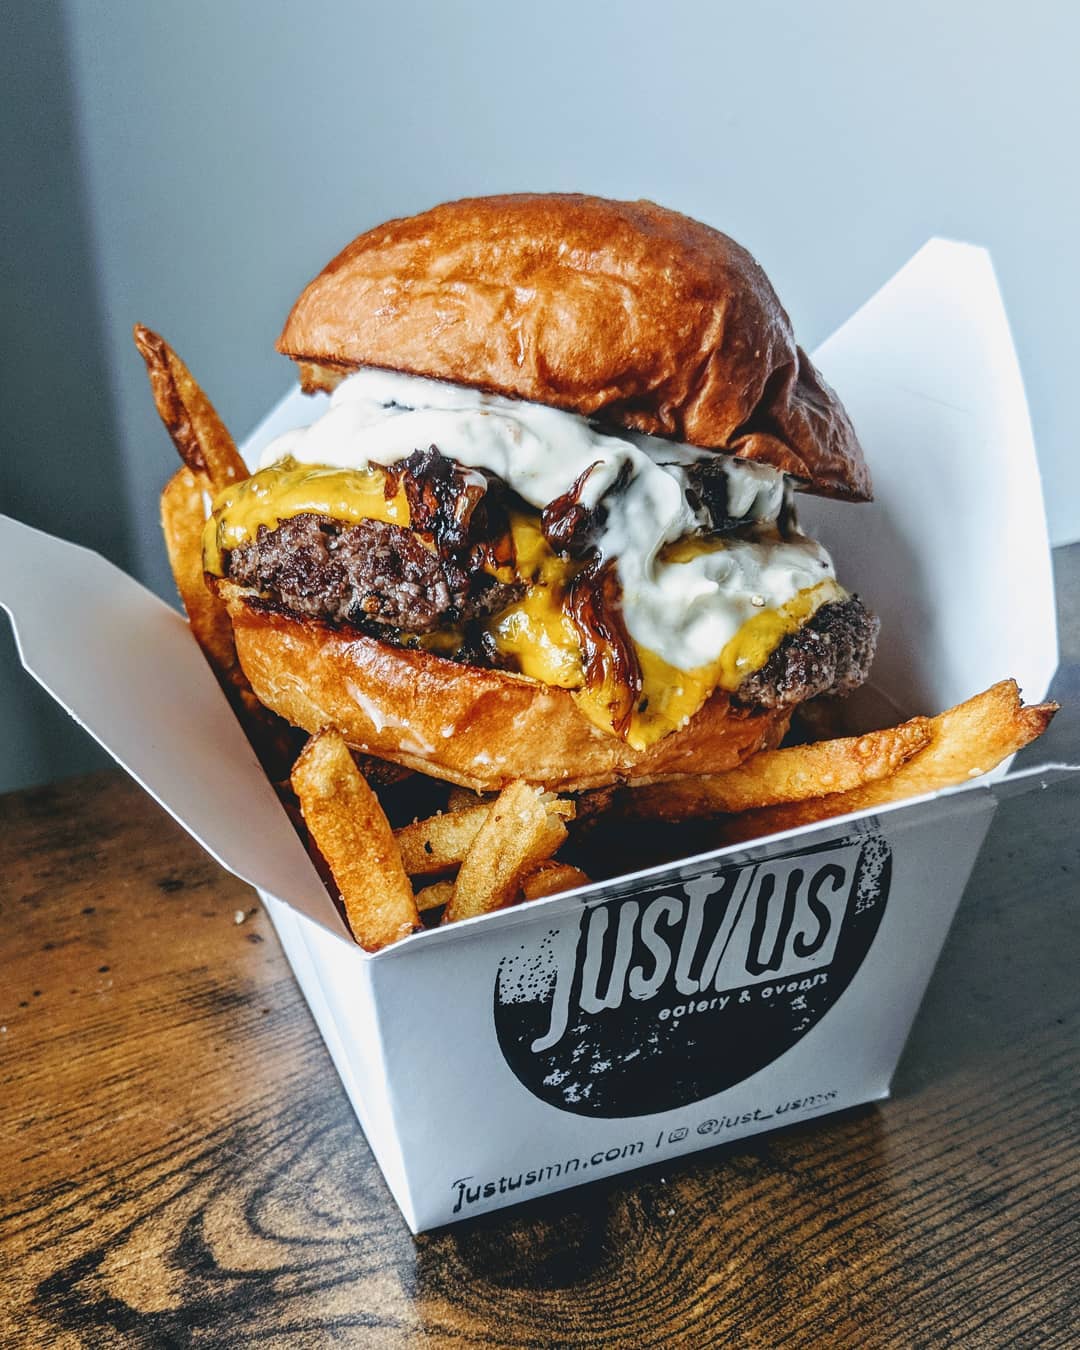 Smash Burger in a Takeout Container from Just Us in Minnesota. Photo by Instagram user @just_usmn